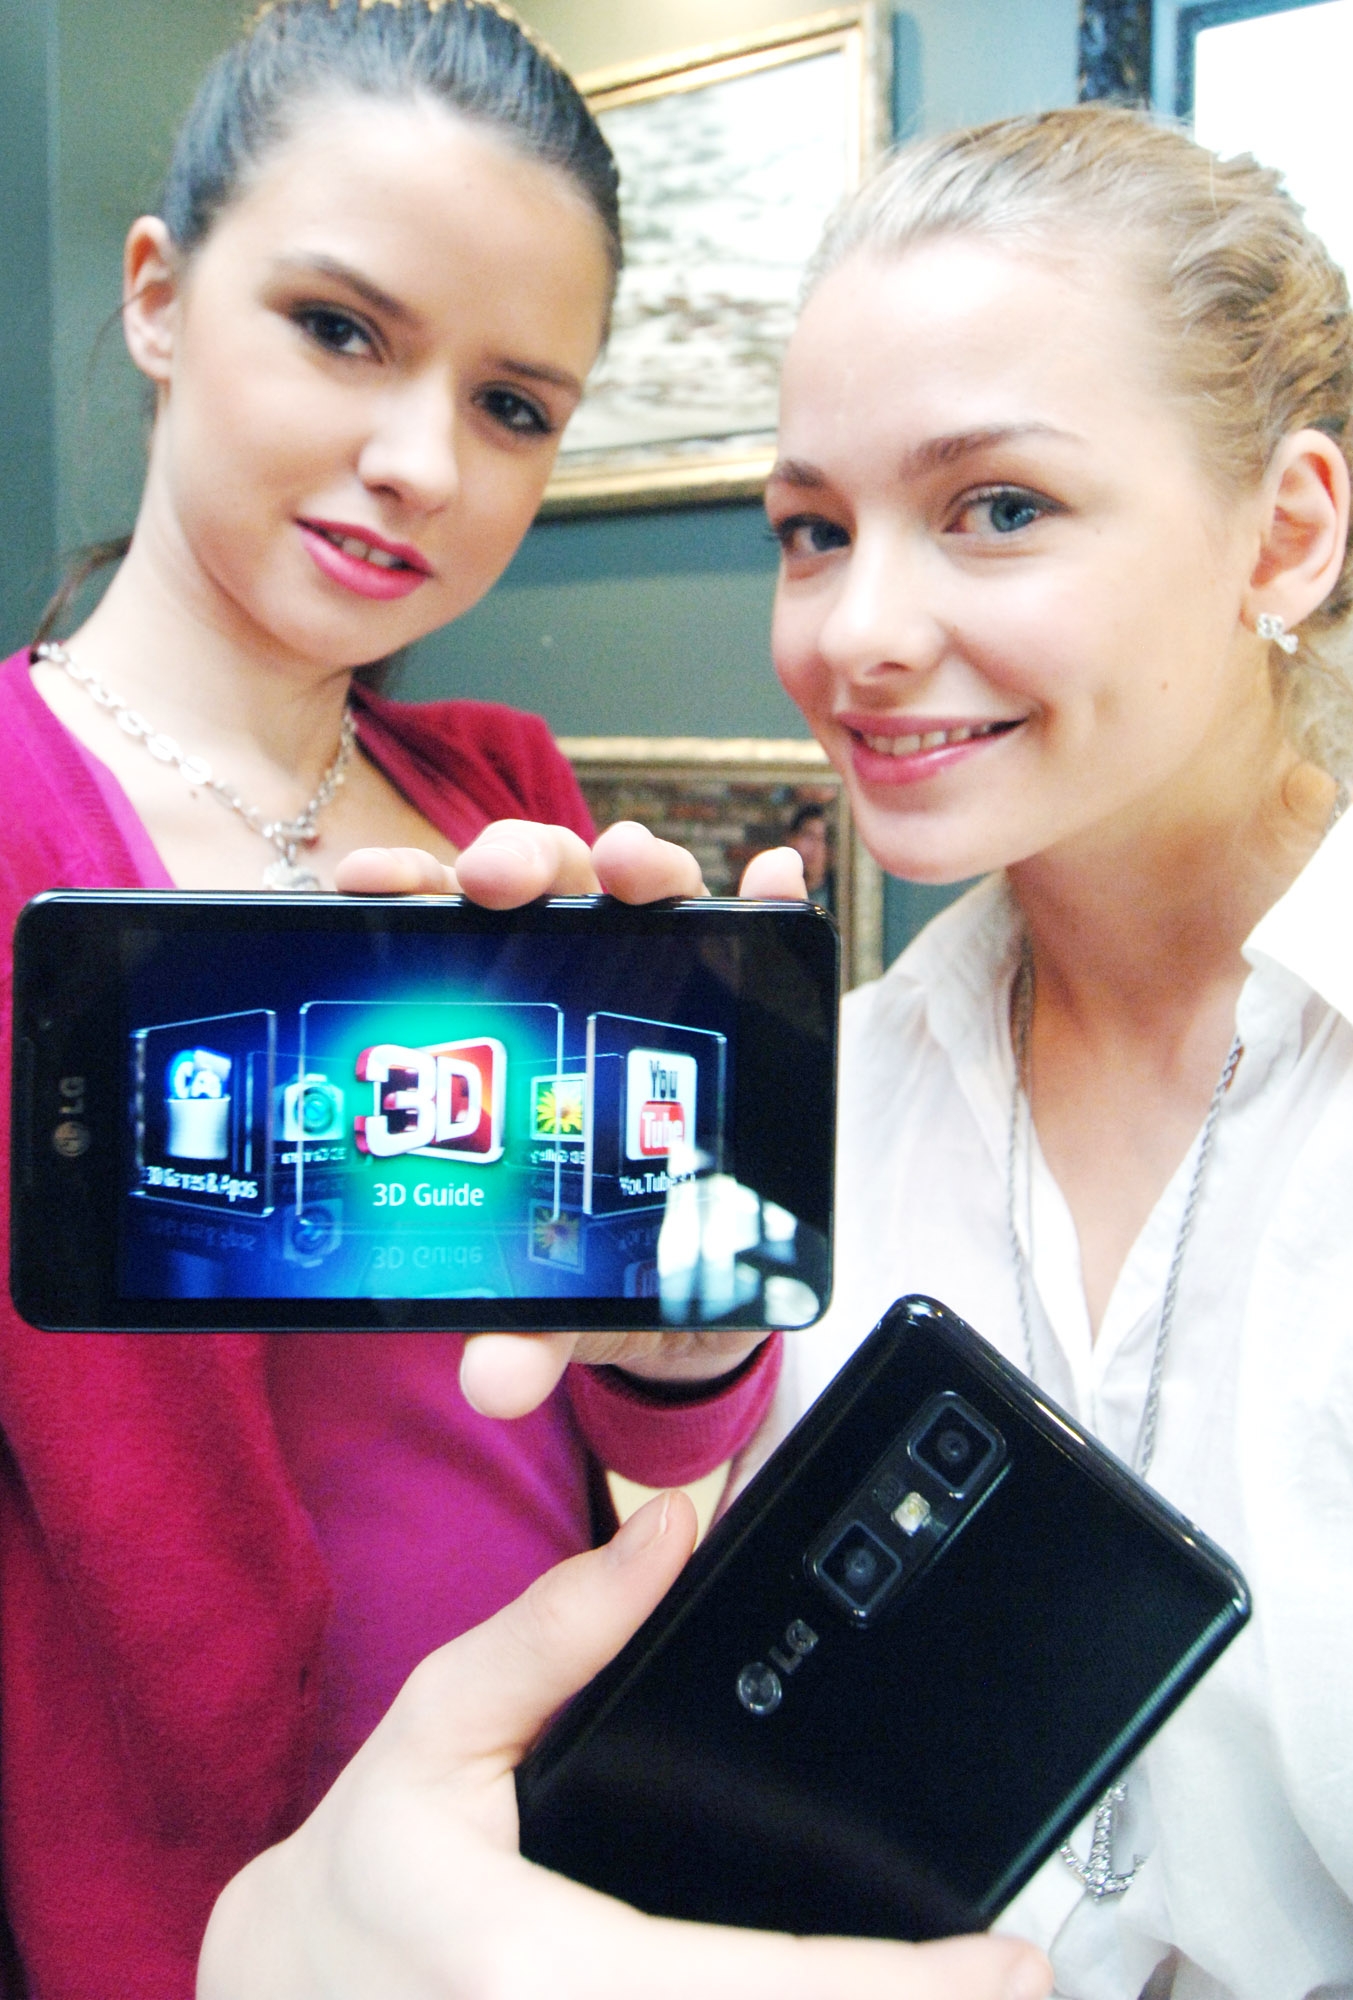 Two female models hold LG Optimus 3D Max and show its front and rear views